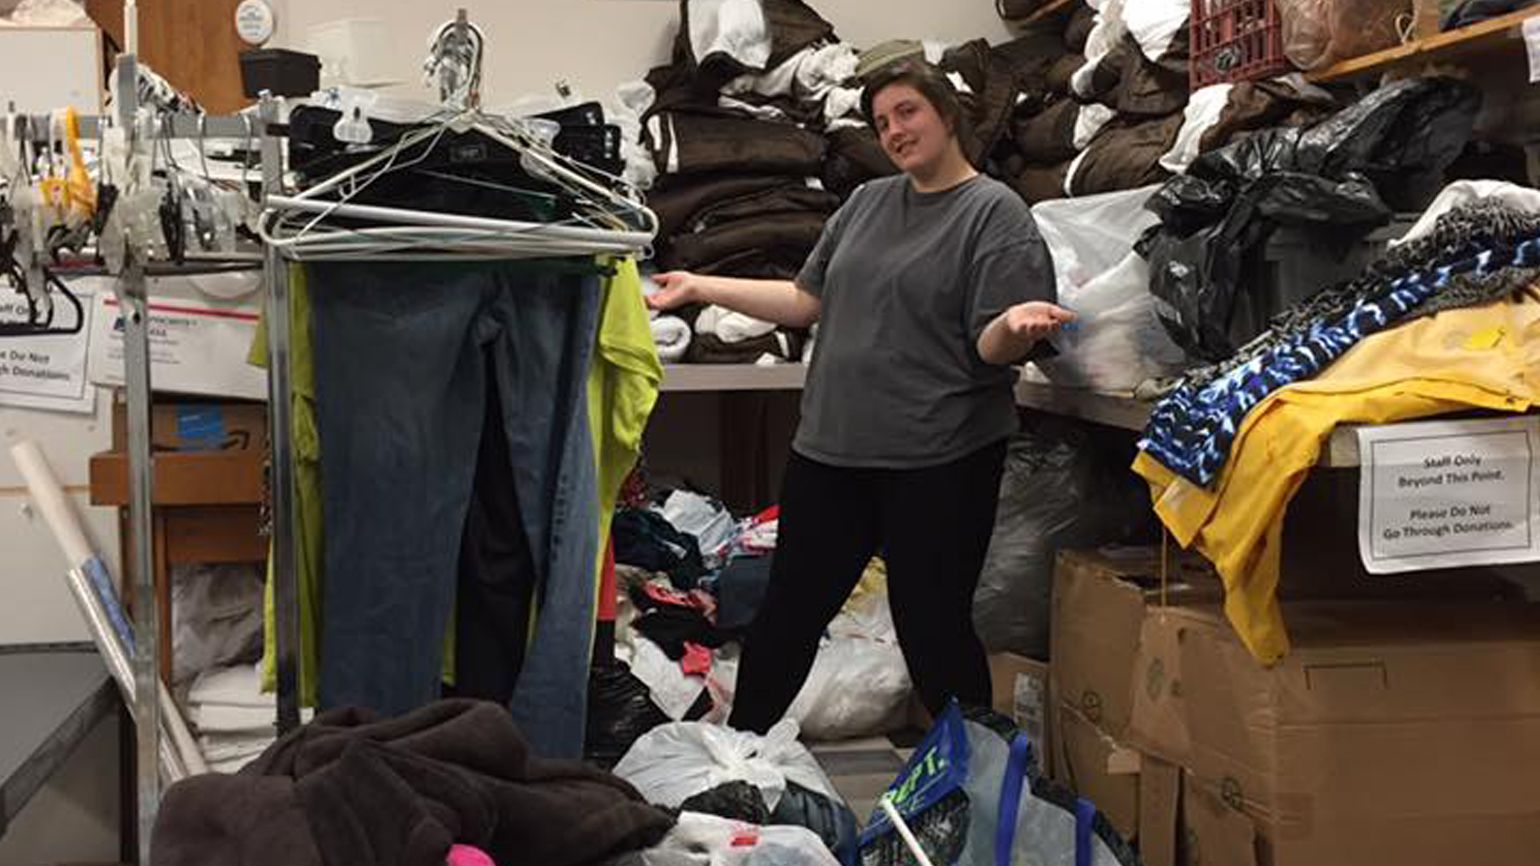 Lindsey chips in to help with a clothing drive in North Carolina.